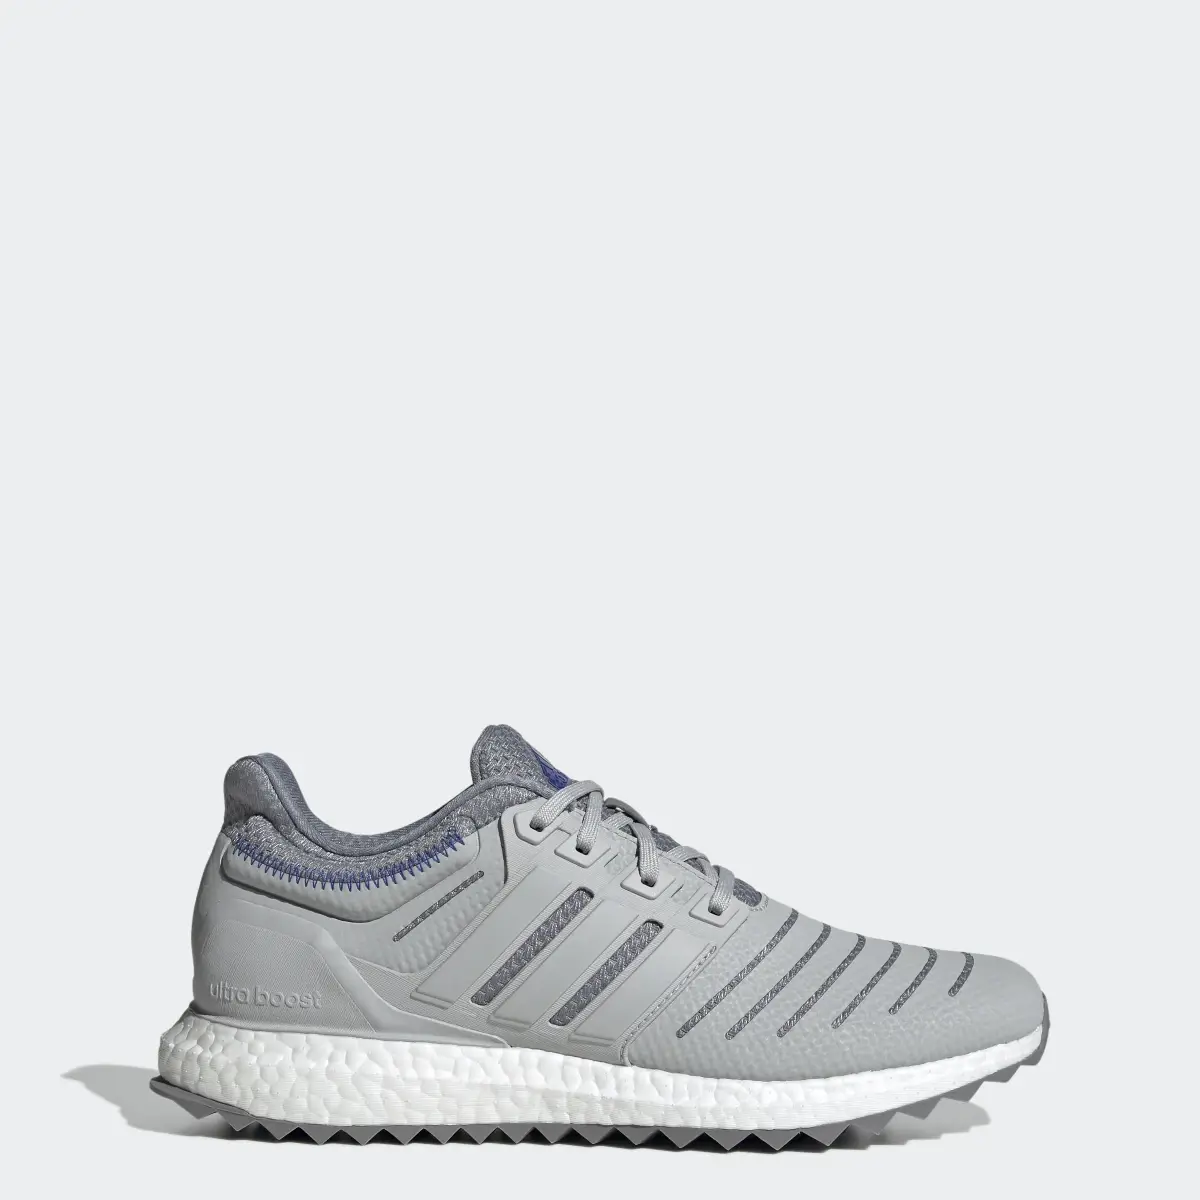 Adidas Chaussure Ultraboost DNA XXII Lifestyle Running Sportswear Capsule Collection. 1